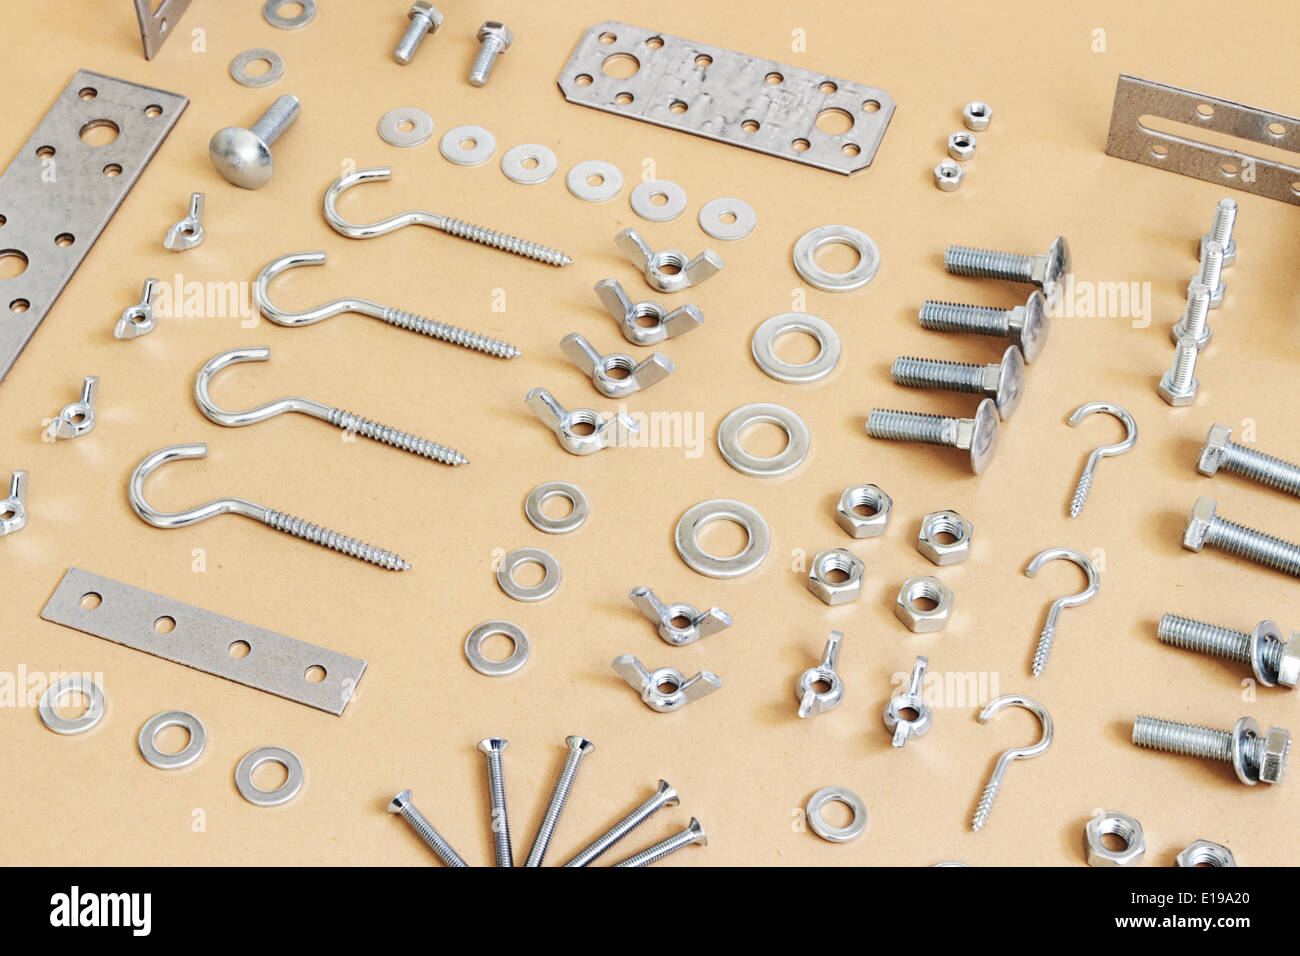 A wide variety of fasteners, spread on paper Stock Photo